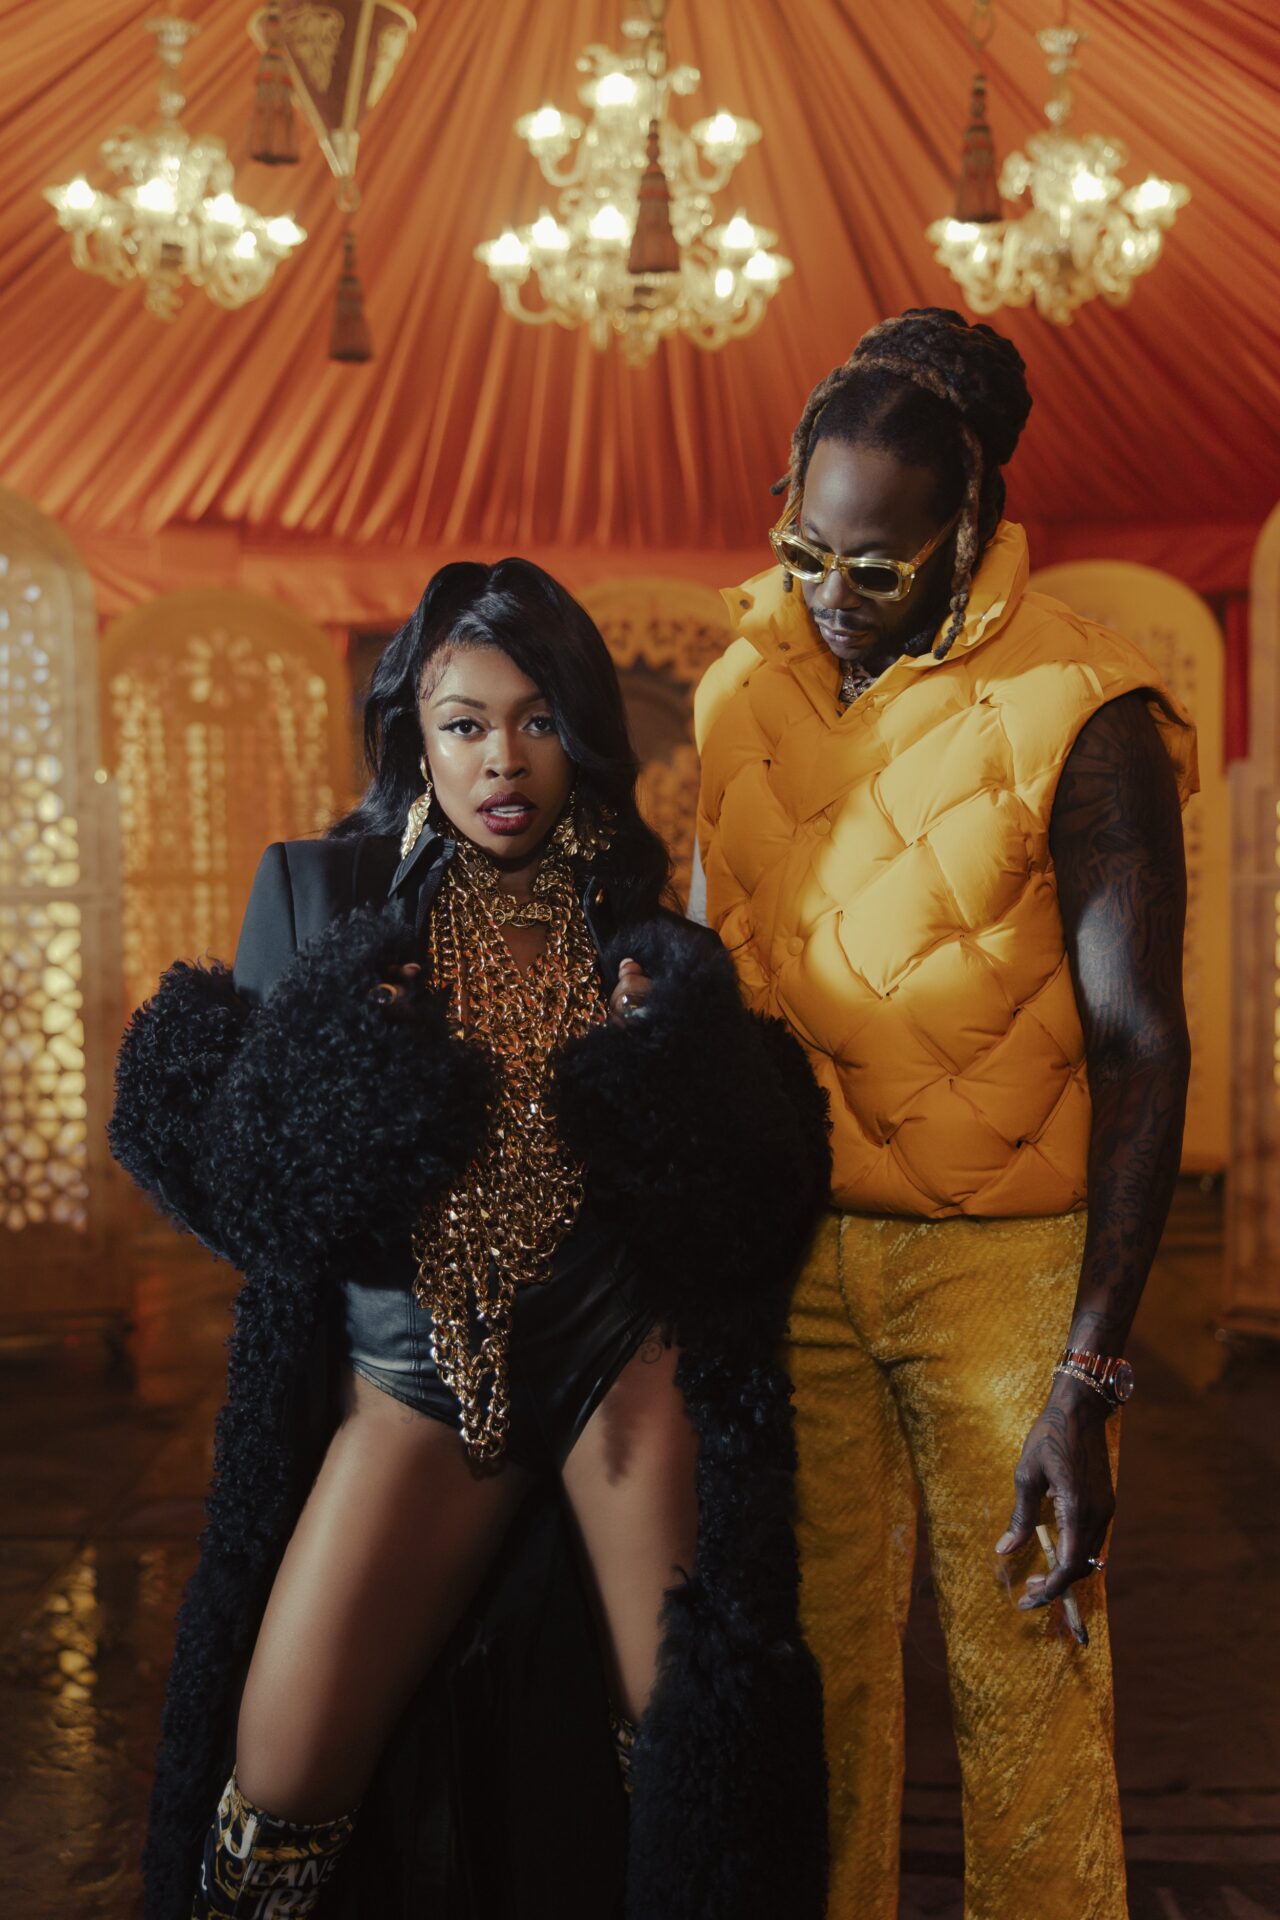 Tink releases a video for his new song "Cater" with 2 Chainz.